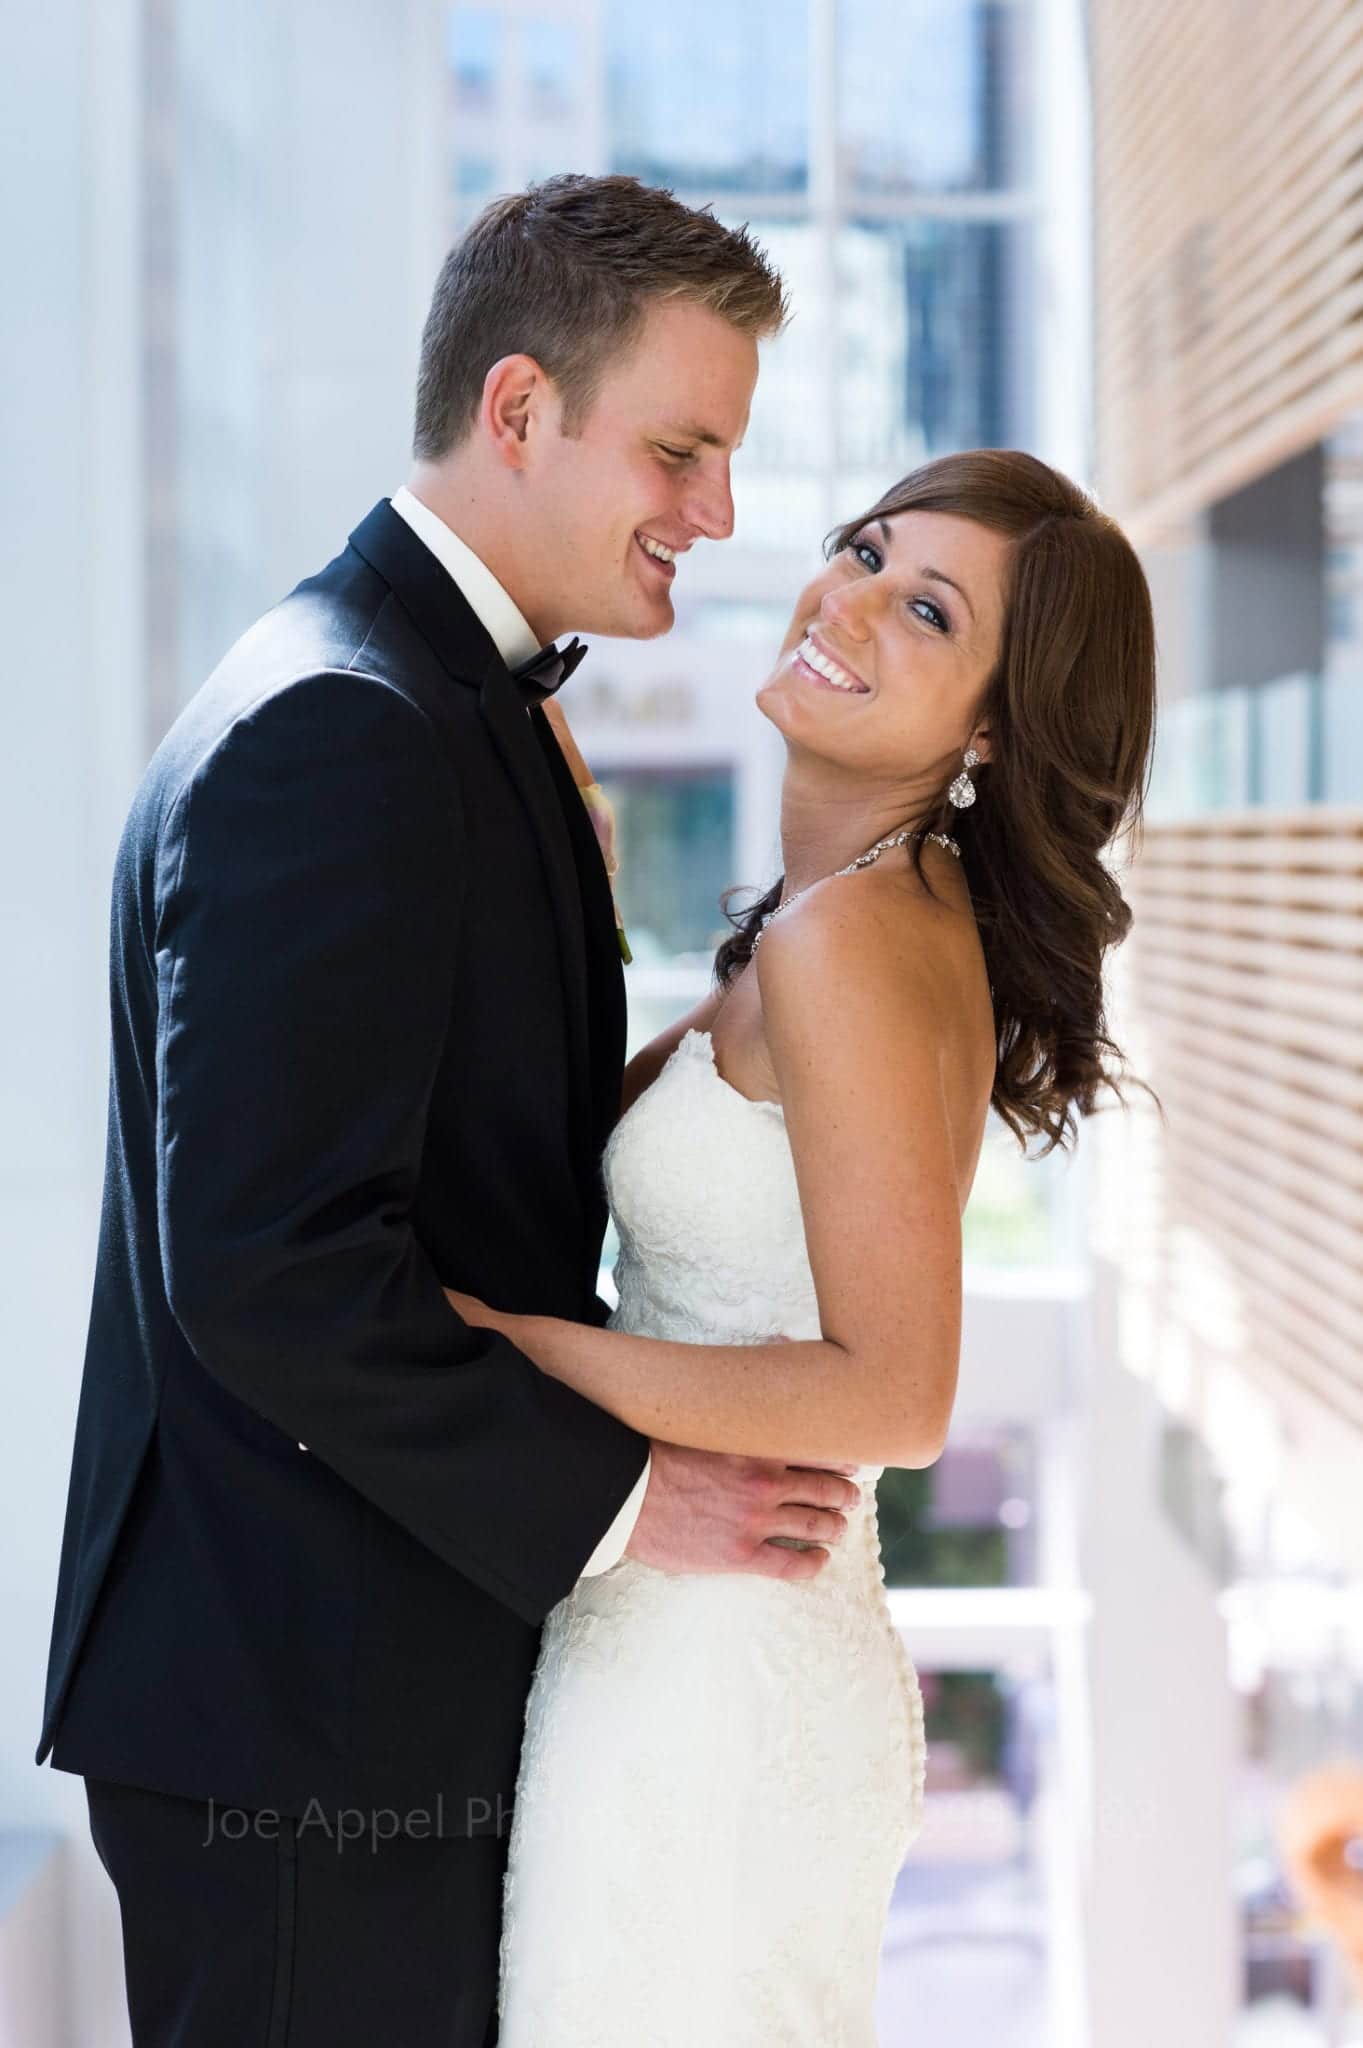 A bride looks at the camera as she stands with her groom. He's looking at her Fairmont Hotel Pittsburgh Weddings.